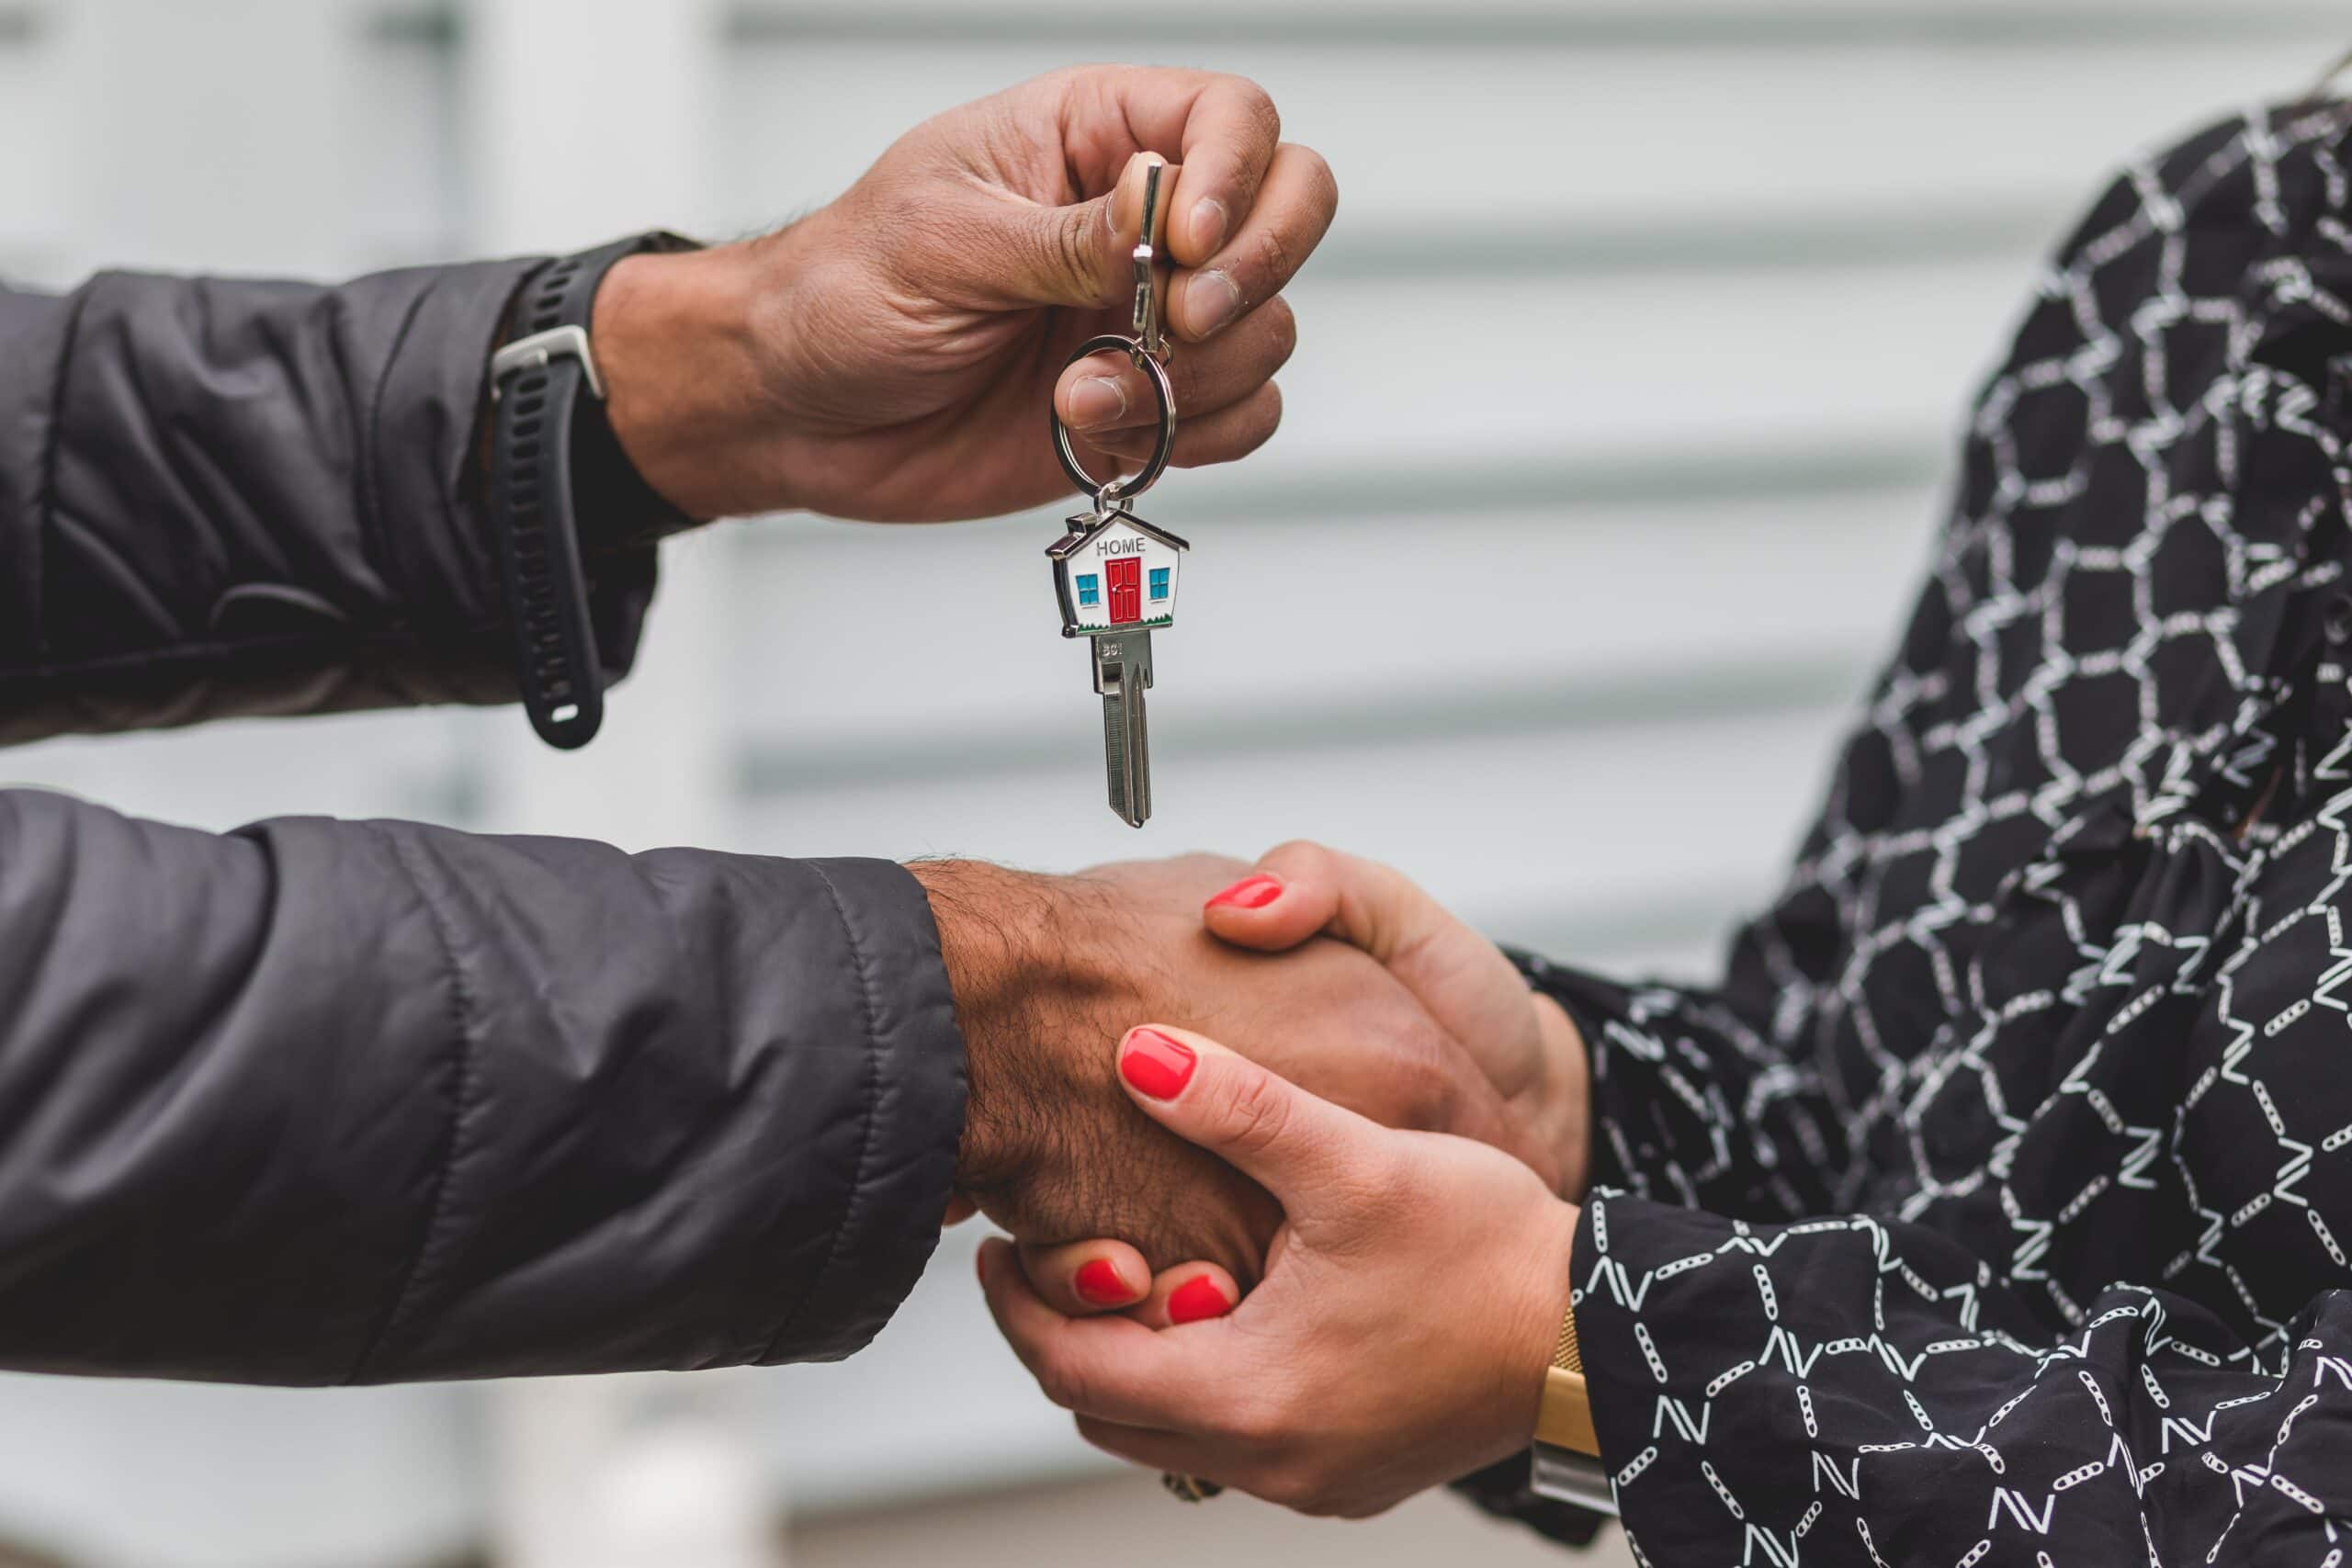 Stock image of getting keys to a house - Start your search on Share to Buy today!